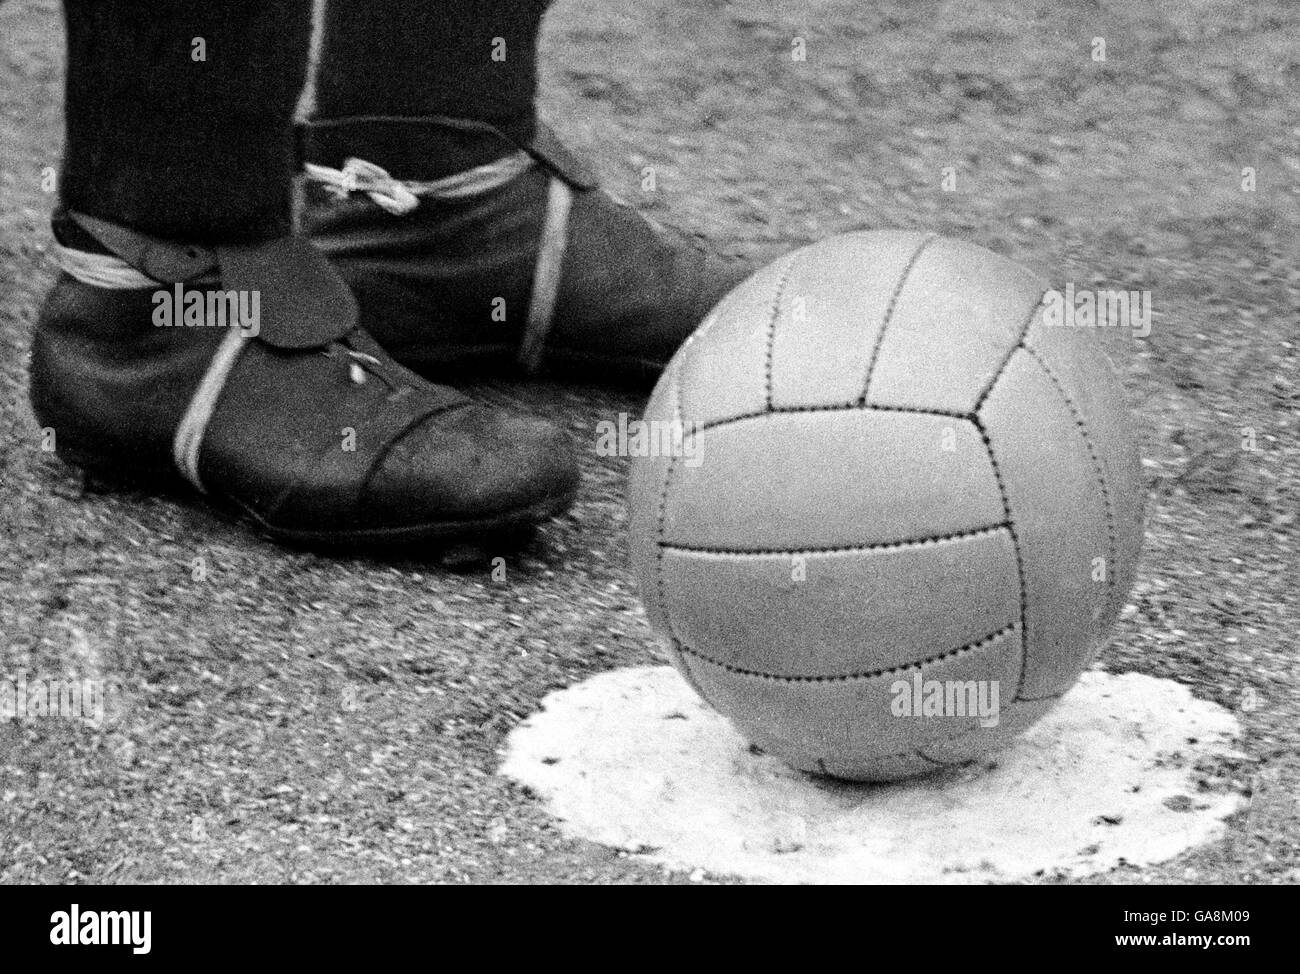 Soccer. Pre-war leather boots and football Stock Photo